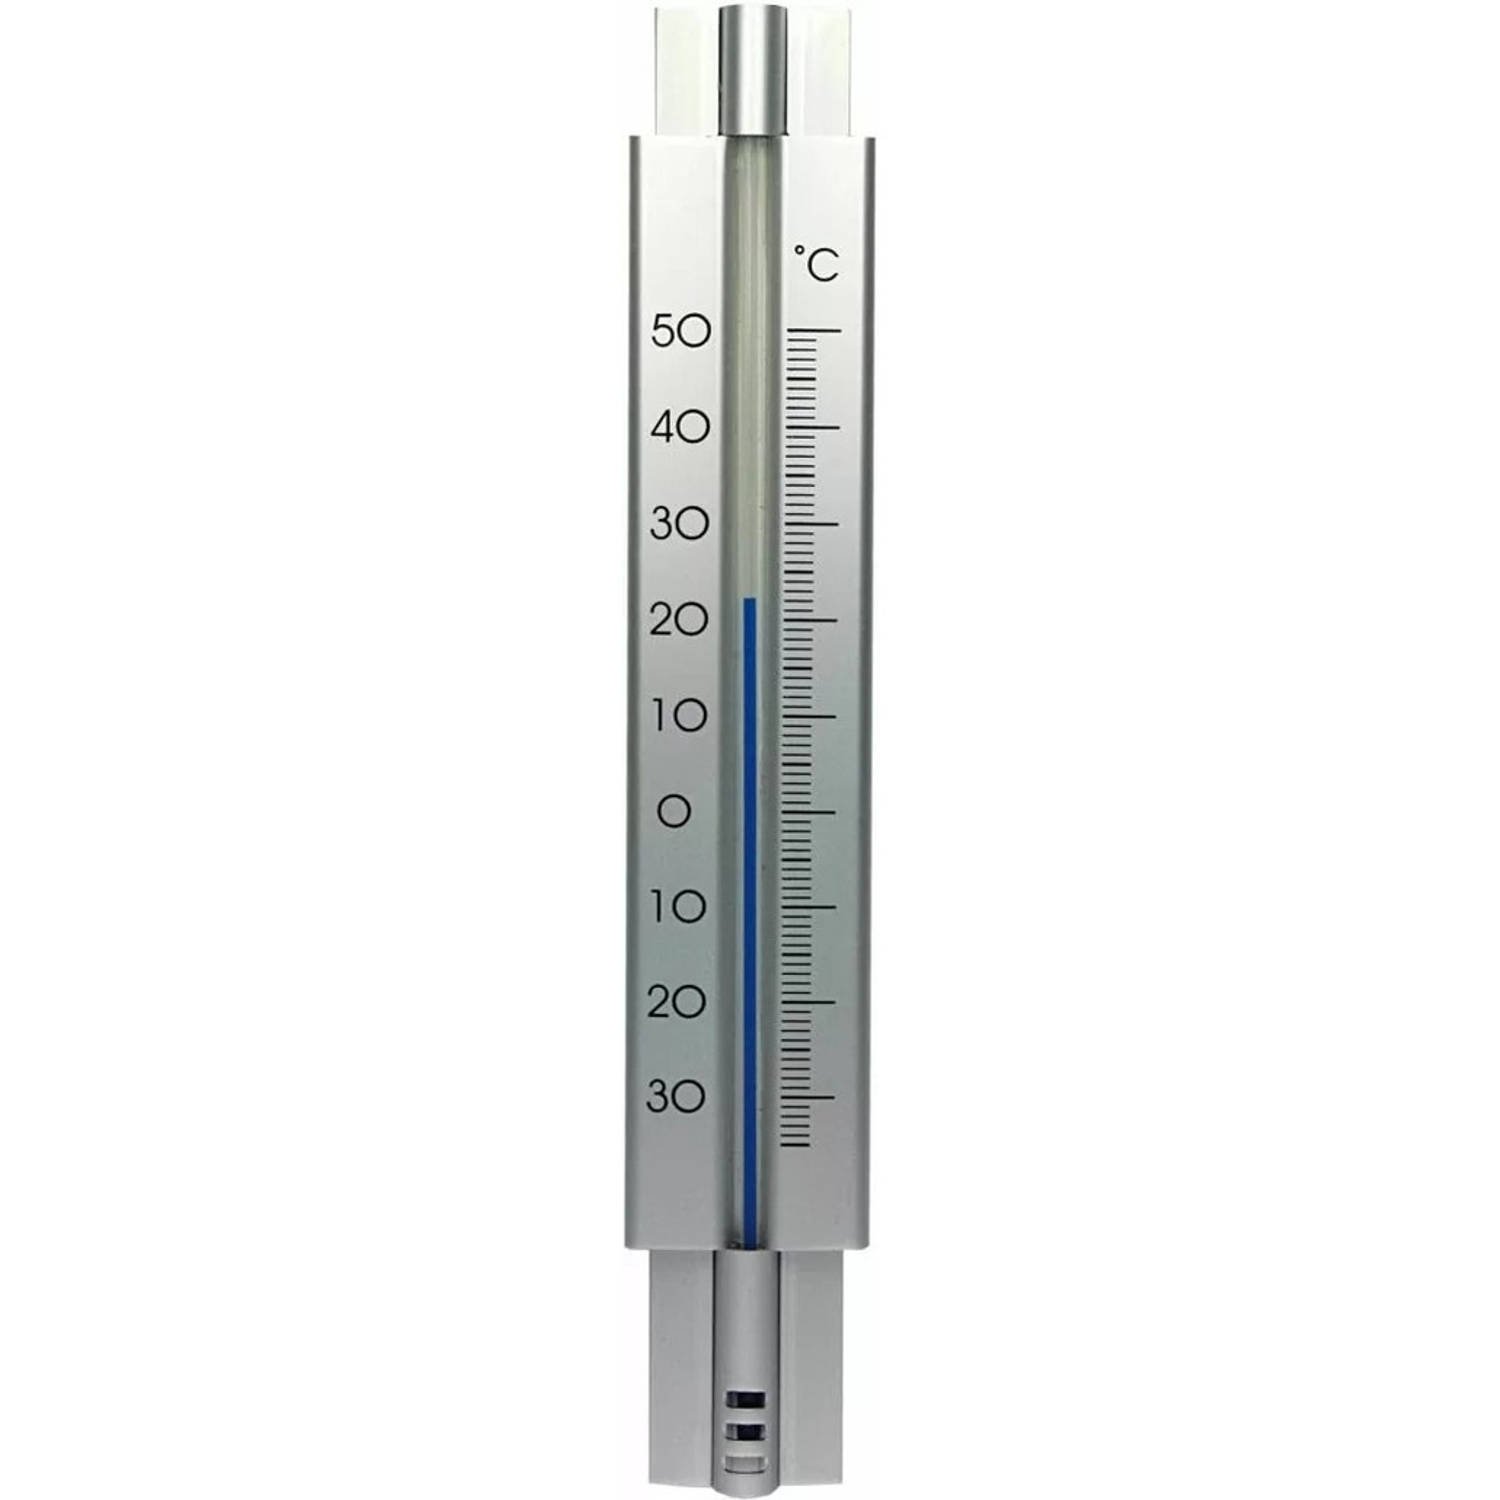 Thermometer buiten - metaal - 29 cm - Buitenthermometers